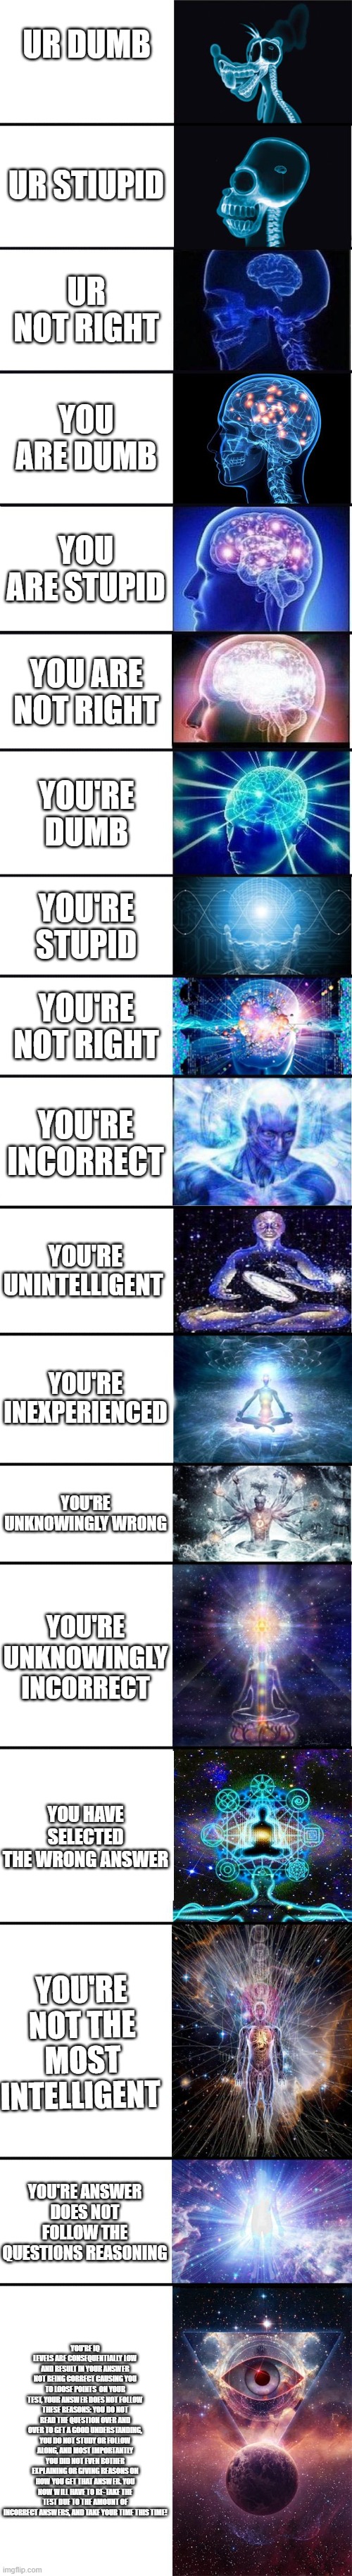 This took me 2 minutes to make and the average meme takes seconds. (And btw ur not stupid) | UR DUMB; UR STIUPID; UR NOT RIGHT; YOU ARE DUMB; YOU ARE STUPID; YOU ARE NOT RIGHT; YOU'RE DUMB; YOU'RE STUPID; YOU'RE NOT RIGHT; YOU'RE INCORRECT; YOU'RE UNINTELLIGENT; YOU'RE INEXPERIENCED; YOU'RE UNKNOWINGLY WRONG; YOU'RE UNKNOWINGLY INCORRECT; YOU HAVE SELECTED THE WRONG ANSWER; YOU'RE NOT THE MOST INTELLIGENT; YOU'RE ANSWER DOES NOT FOLLOW THE QUESTIONS REASONING; YOU'RE IQ LEVELS ARE CONSEQUENTIALLY LOW AND RESULT IN YOUR ANSWER NOT BEING CORRECT CAUSING YOU TO LOOSE POINTS  ON YOUR TEST, YOUR ANSWER DOES NOT FOLLOW THESE REASONS: YOU DO NOT READ THE QUESTION OVER AND OVER TO GET A GOOD UNDERSTANDING, YOU DO NOT STUDY OR FOLLOW ALONG, AND MOST IMPORTANTLY YOU DID NOT EVEN BOTHER EXPLAINING OR GIVING REASONS ON HOW YOU GET THAT ANSWER. YOU NOW WILL HAVE TO RE-TAKE THE TEST DUE TO THE AMOUNT OF INCORRECT ANSWERS, AND TAKE YOUR TIME THIS TIME! | image tagged in expanding brain 9001 | made w/ Imgflip meme maker